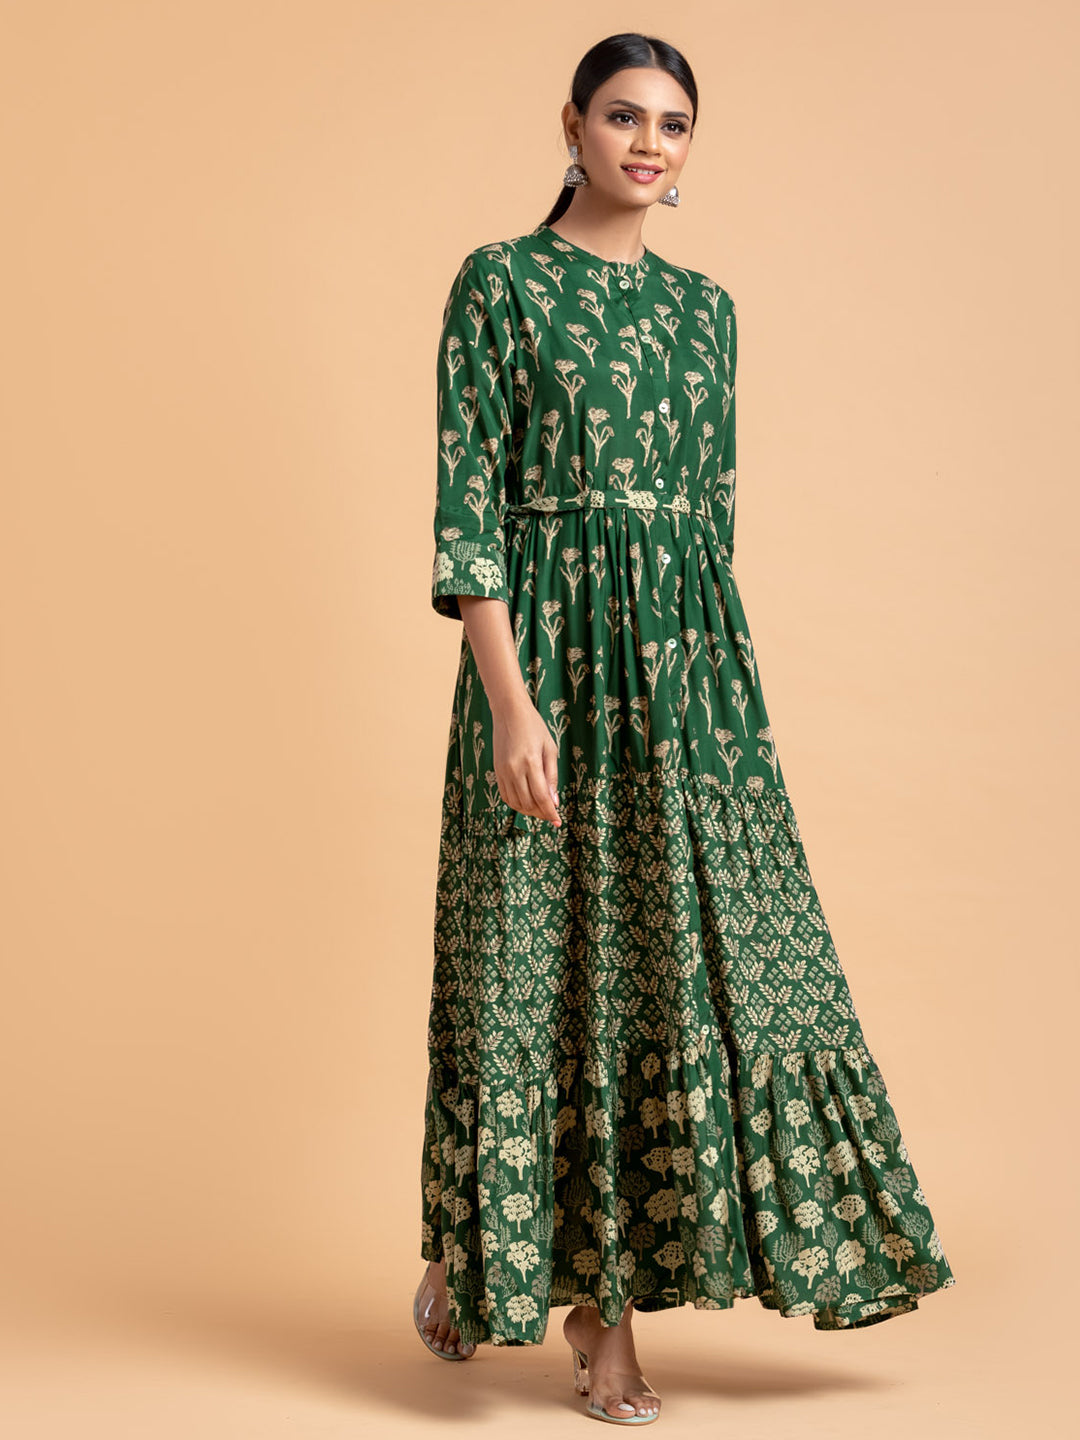 Emerald Green Tiered Dress With Floral Print In Cotton